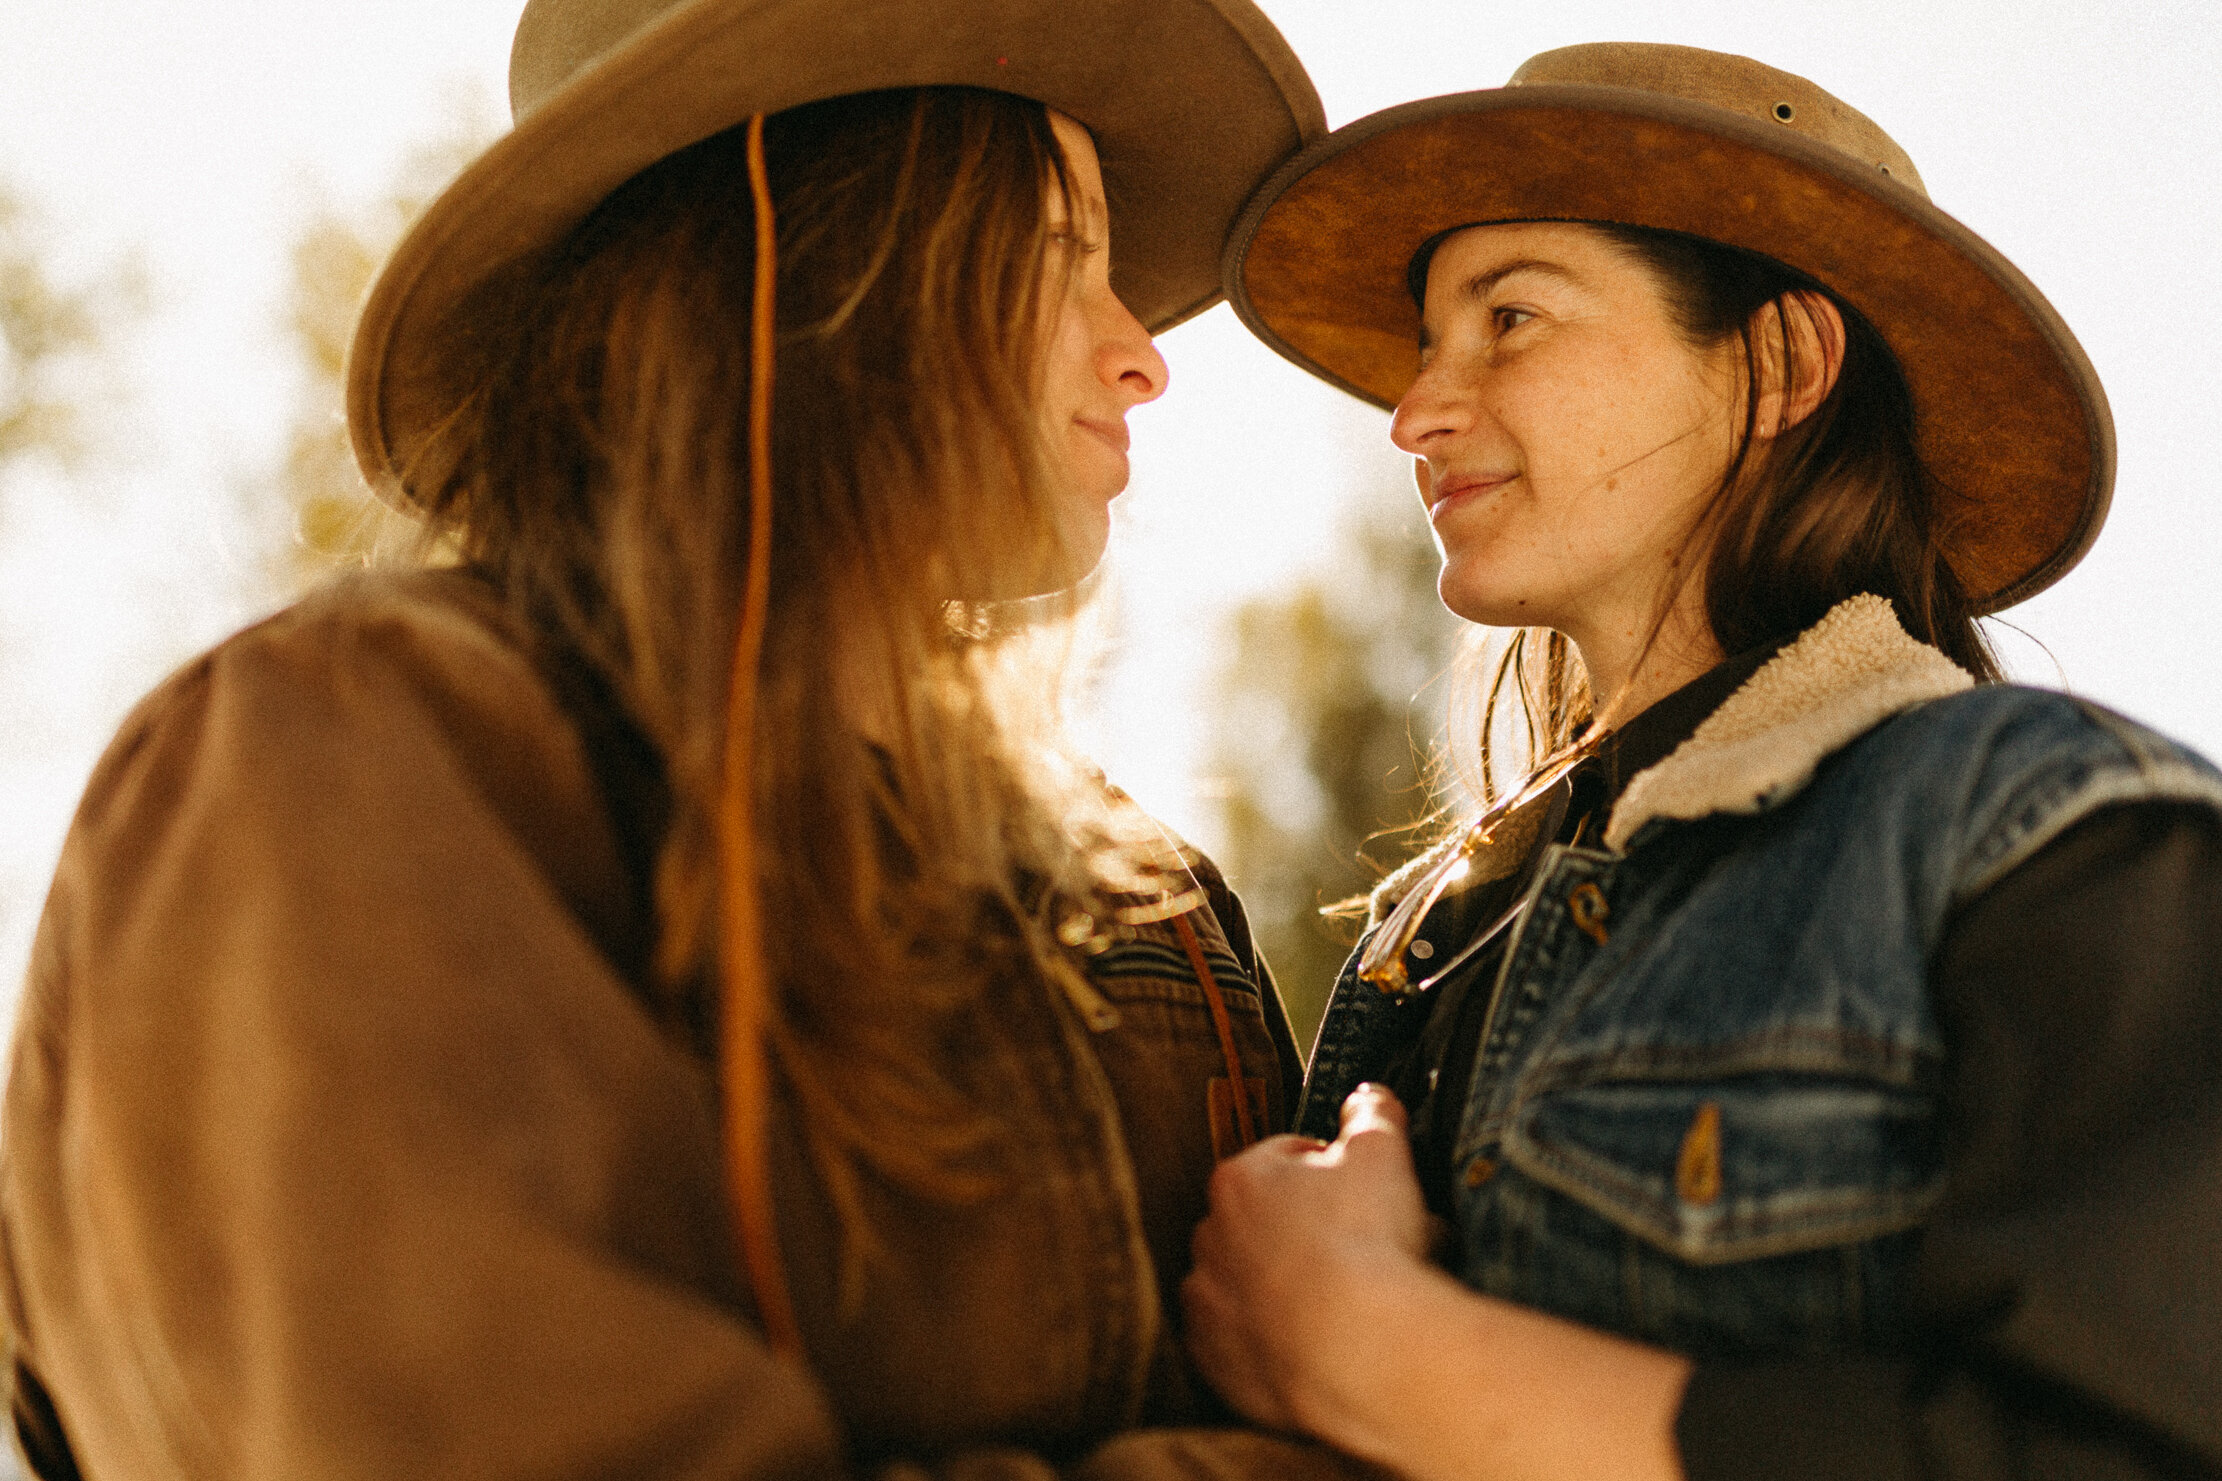 queer-gay-lesbian-trans-affirming-lgbtq-adventure-elopement-intimate-wedding-photographer-pnw-pacific-northwest-pnw-mountain-stream-forest-cowgay-tacoma-seattle-washington-portland-oregon-halle-roland-photography-non-binary-film-artist-234.jpg